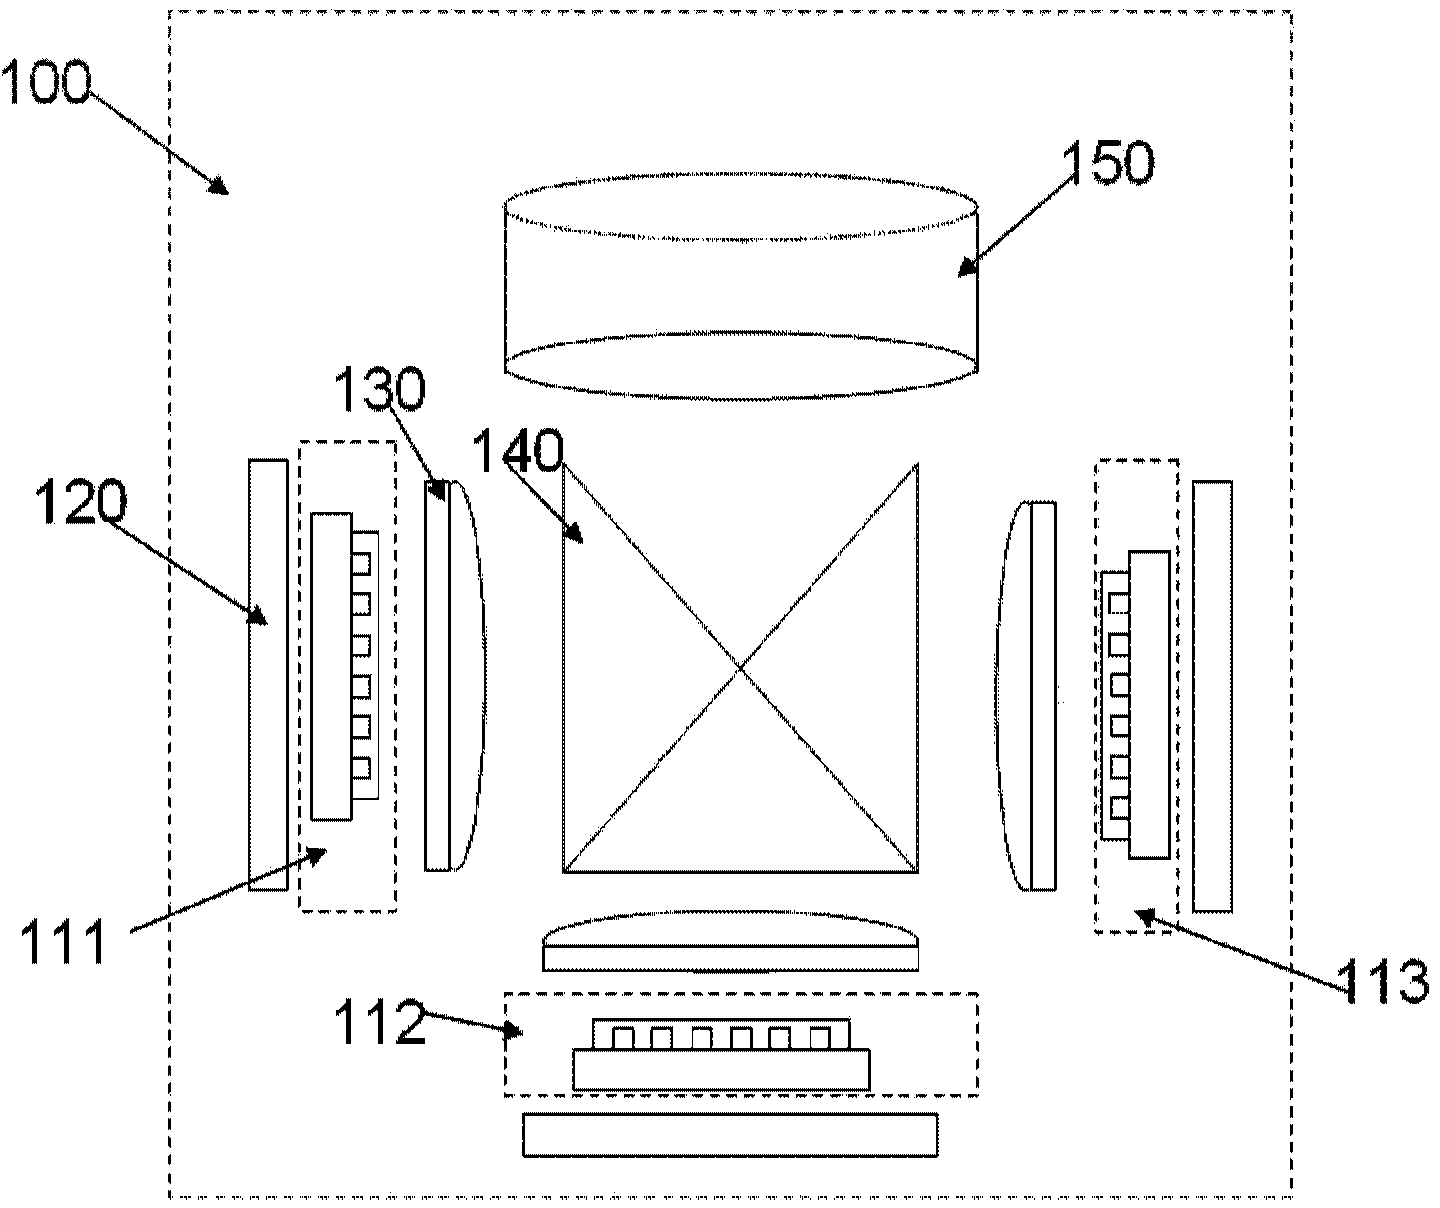 Projection display system based on full-color light-emitting diode matrixes